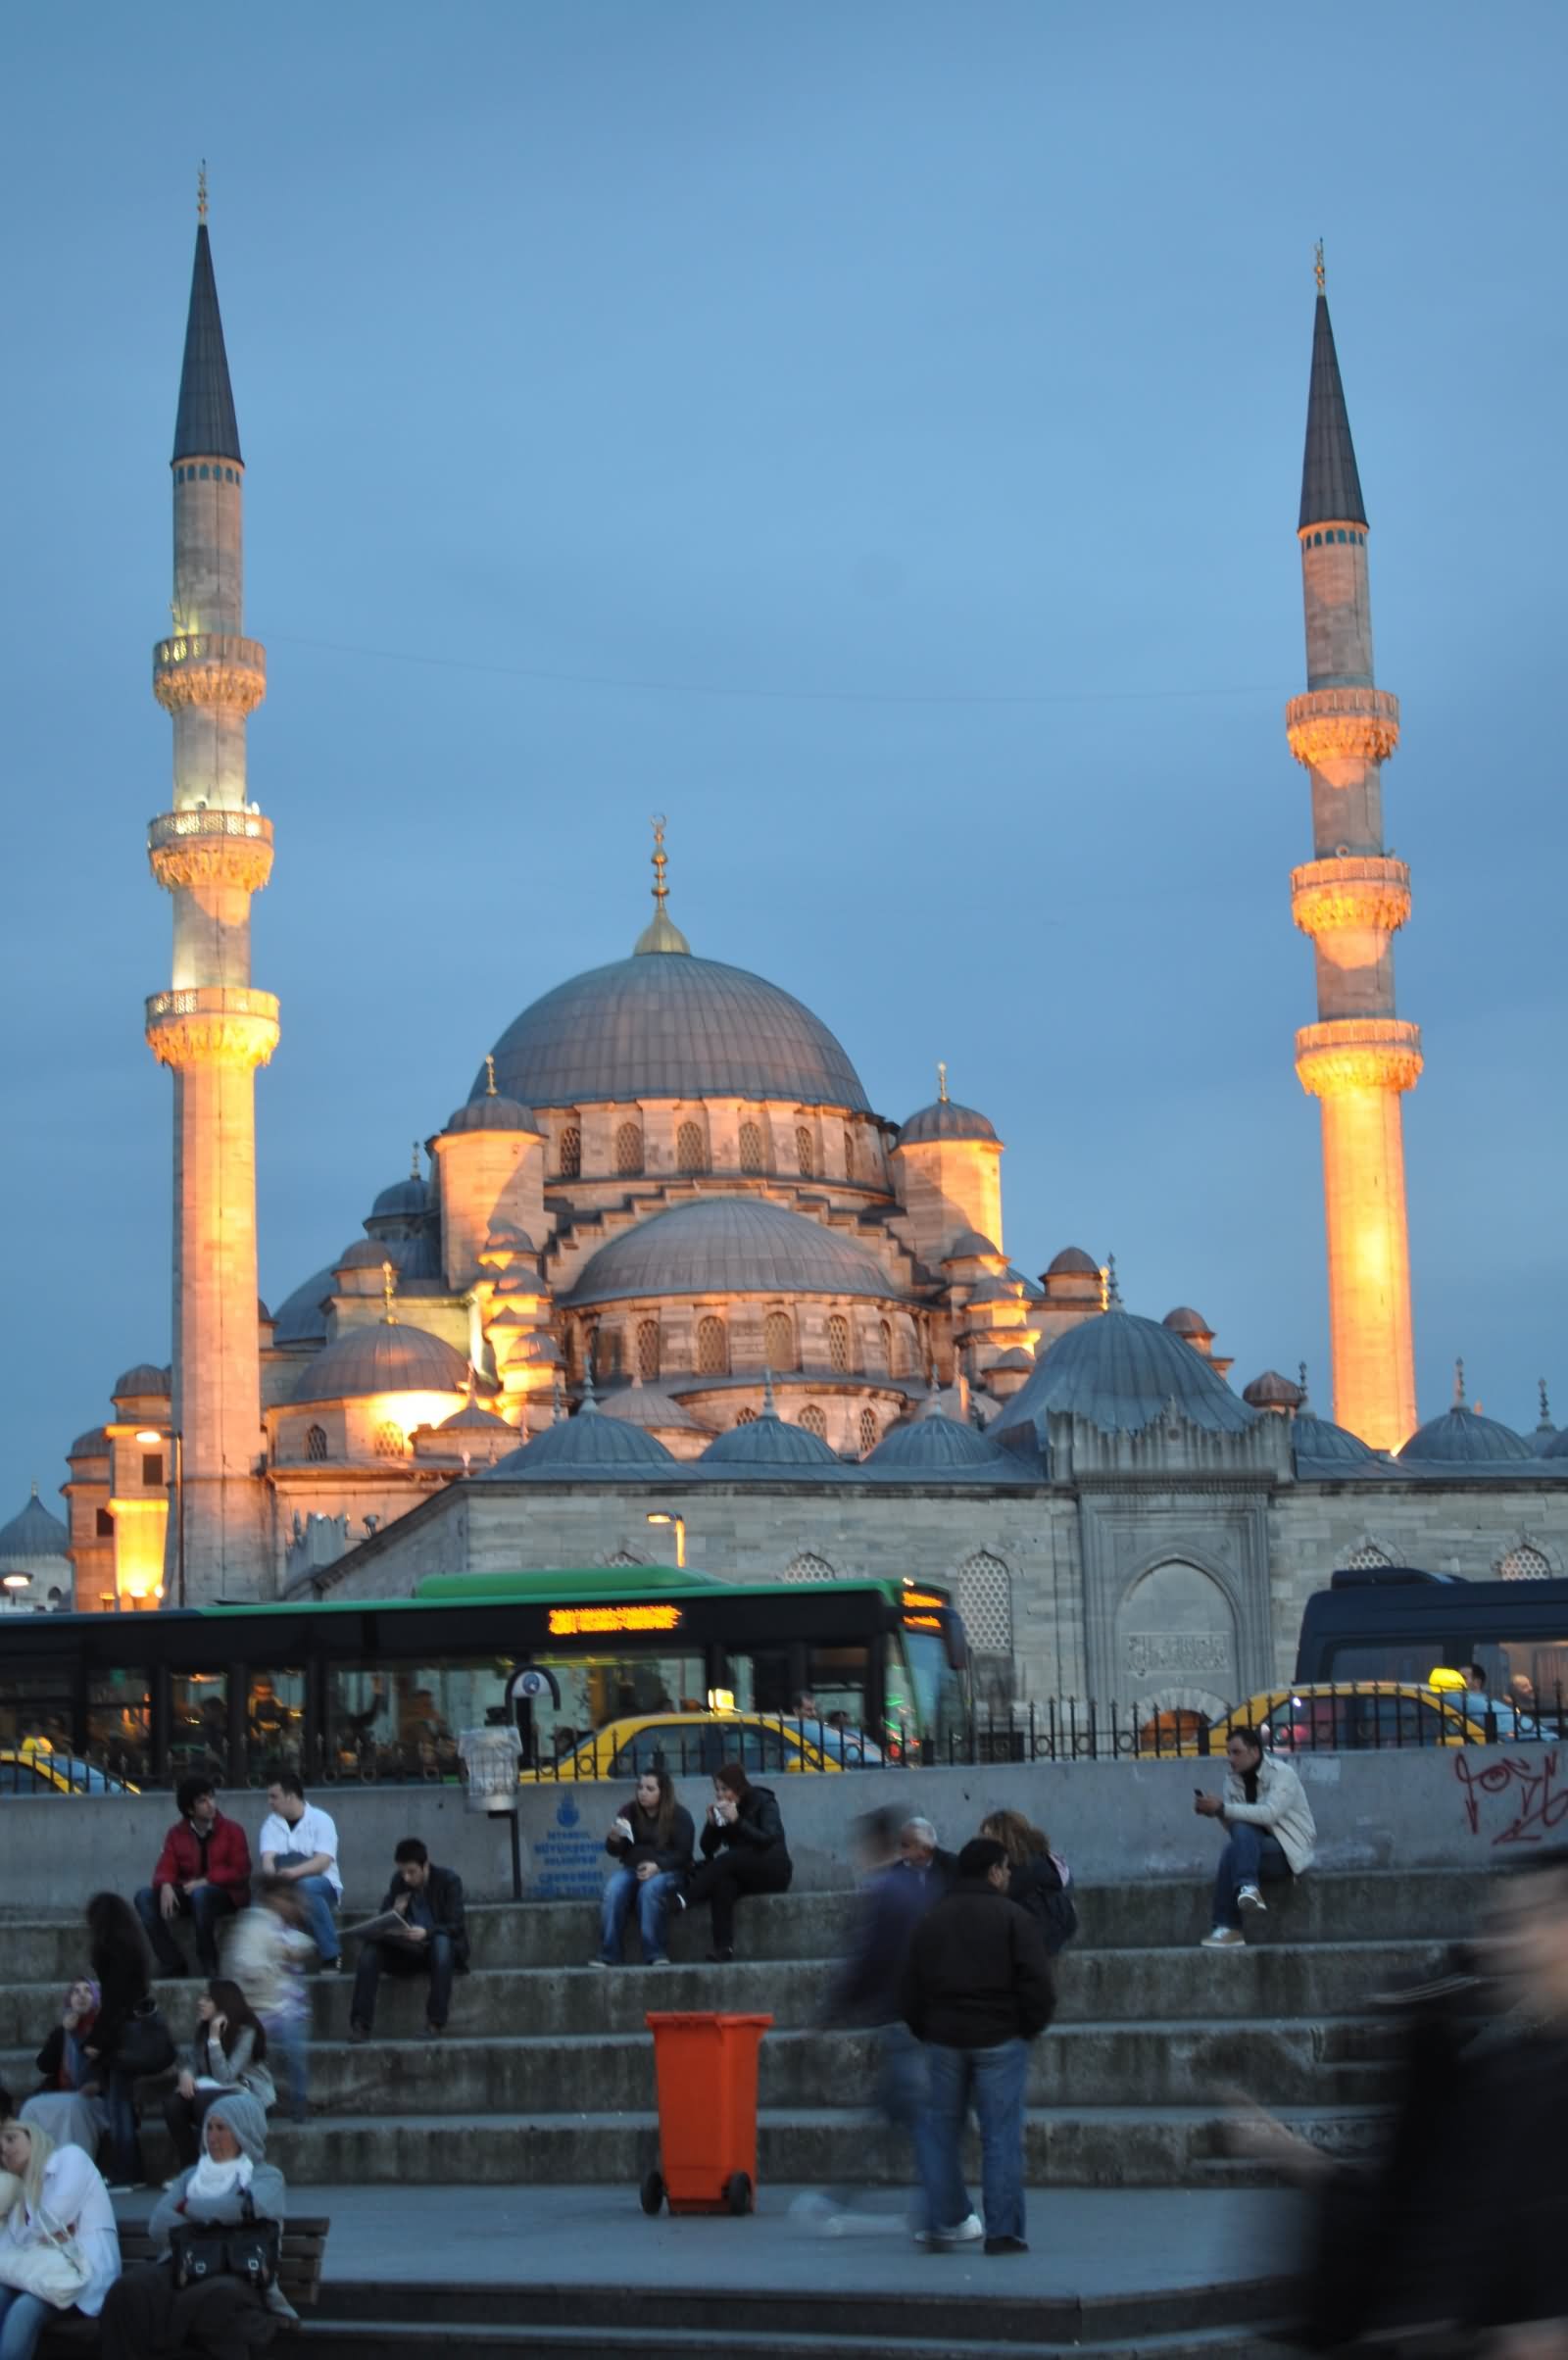 The Yeni Cami Mosque Lit Up At Night